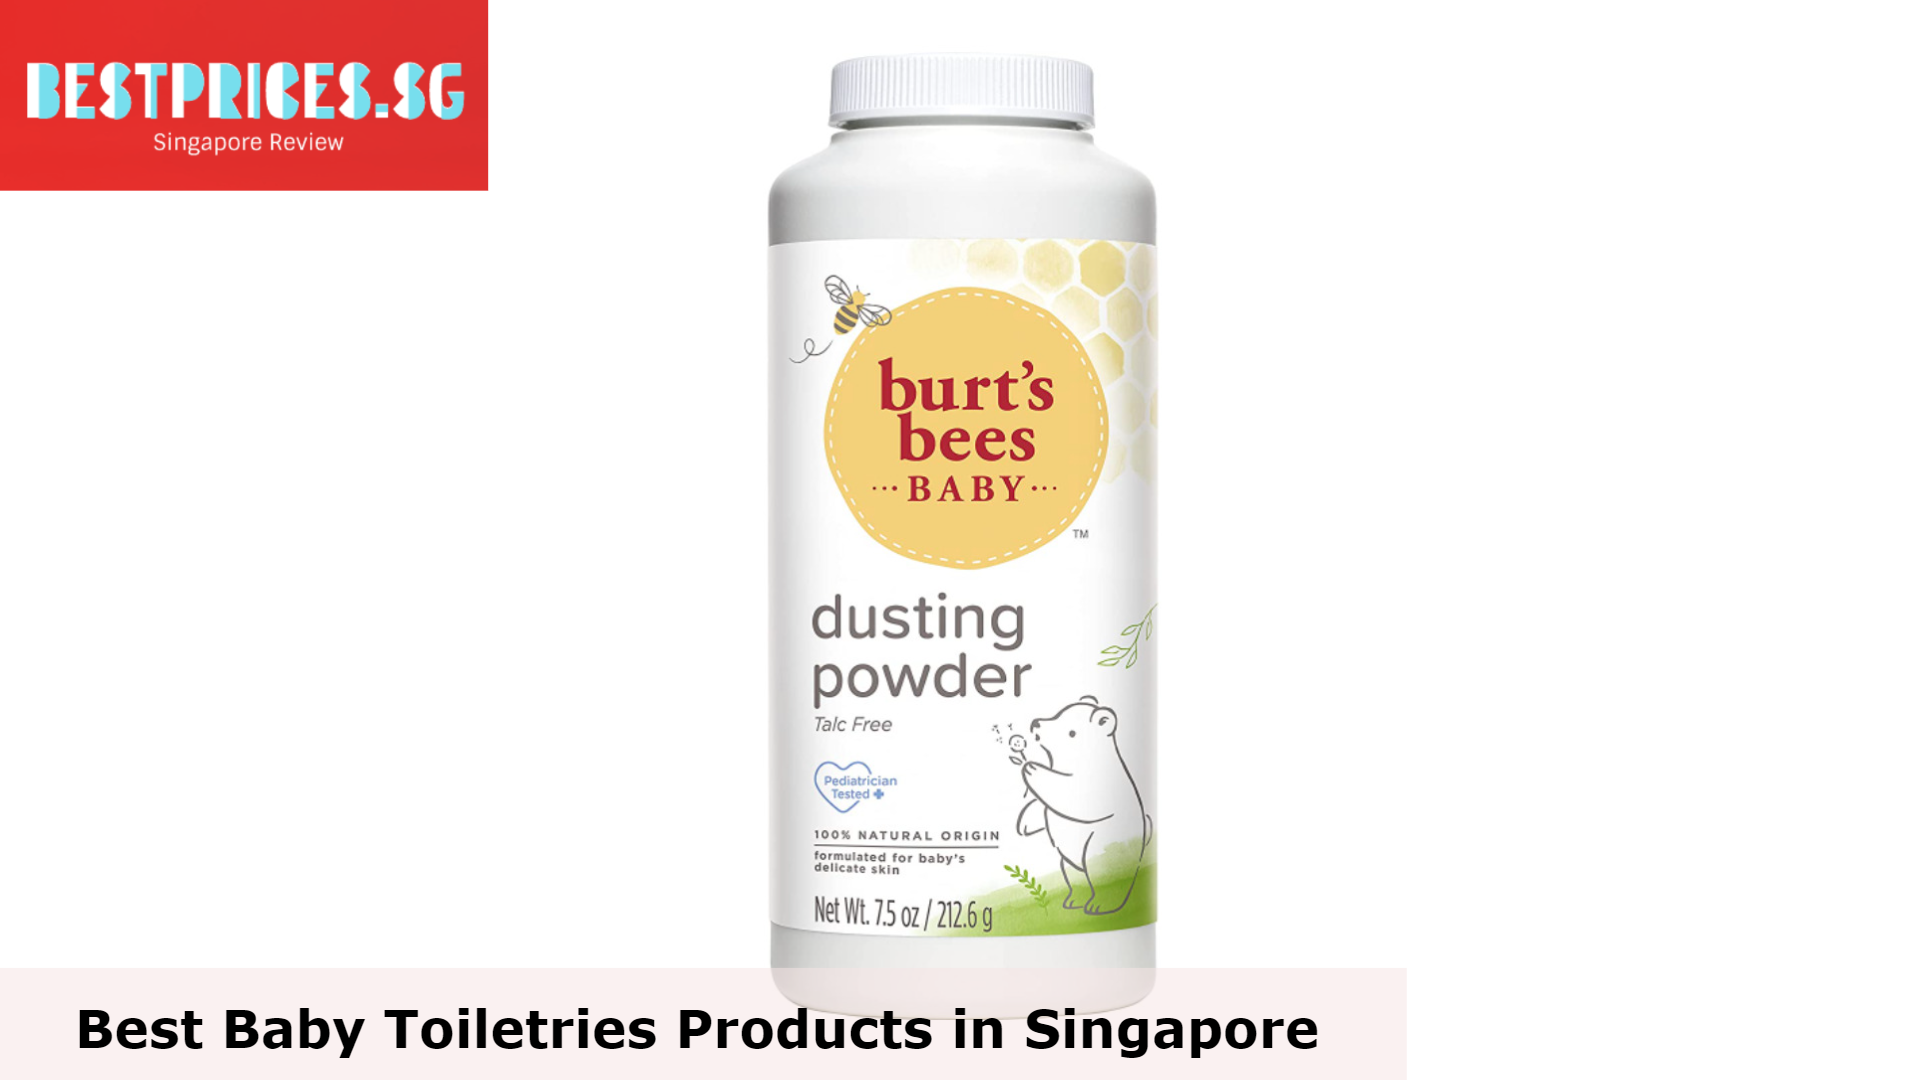 Burt’s Bees Baby Bees Dusting Powder - Best Baby Toiletries Products in Singapore, Baby Toiletries Products Singapore, What toiletries do you need for newborns?, List of Essential Baby Toiletries in Singapore, What are baby toiletries?, What Toiletries do babies need?, Which is the best baby bath products in Singapore?, baby toiletries kit Singapore, baby toiletries cost, baby toiletries cost for a year, baby products Singapore, baby toiletries bag, newborn baby products, items in a baby shop, What products do you need for a newborn baby in Singapore?, baby products online singapore, Where to buy cheap Baby stuff in Singapore,